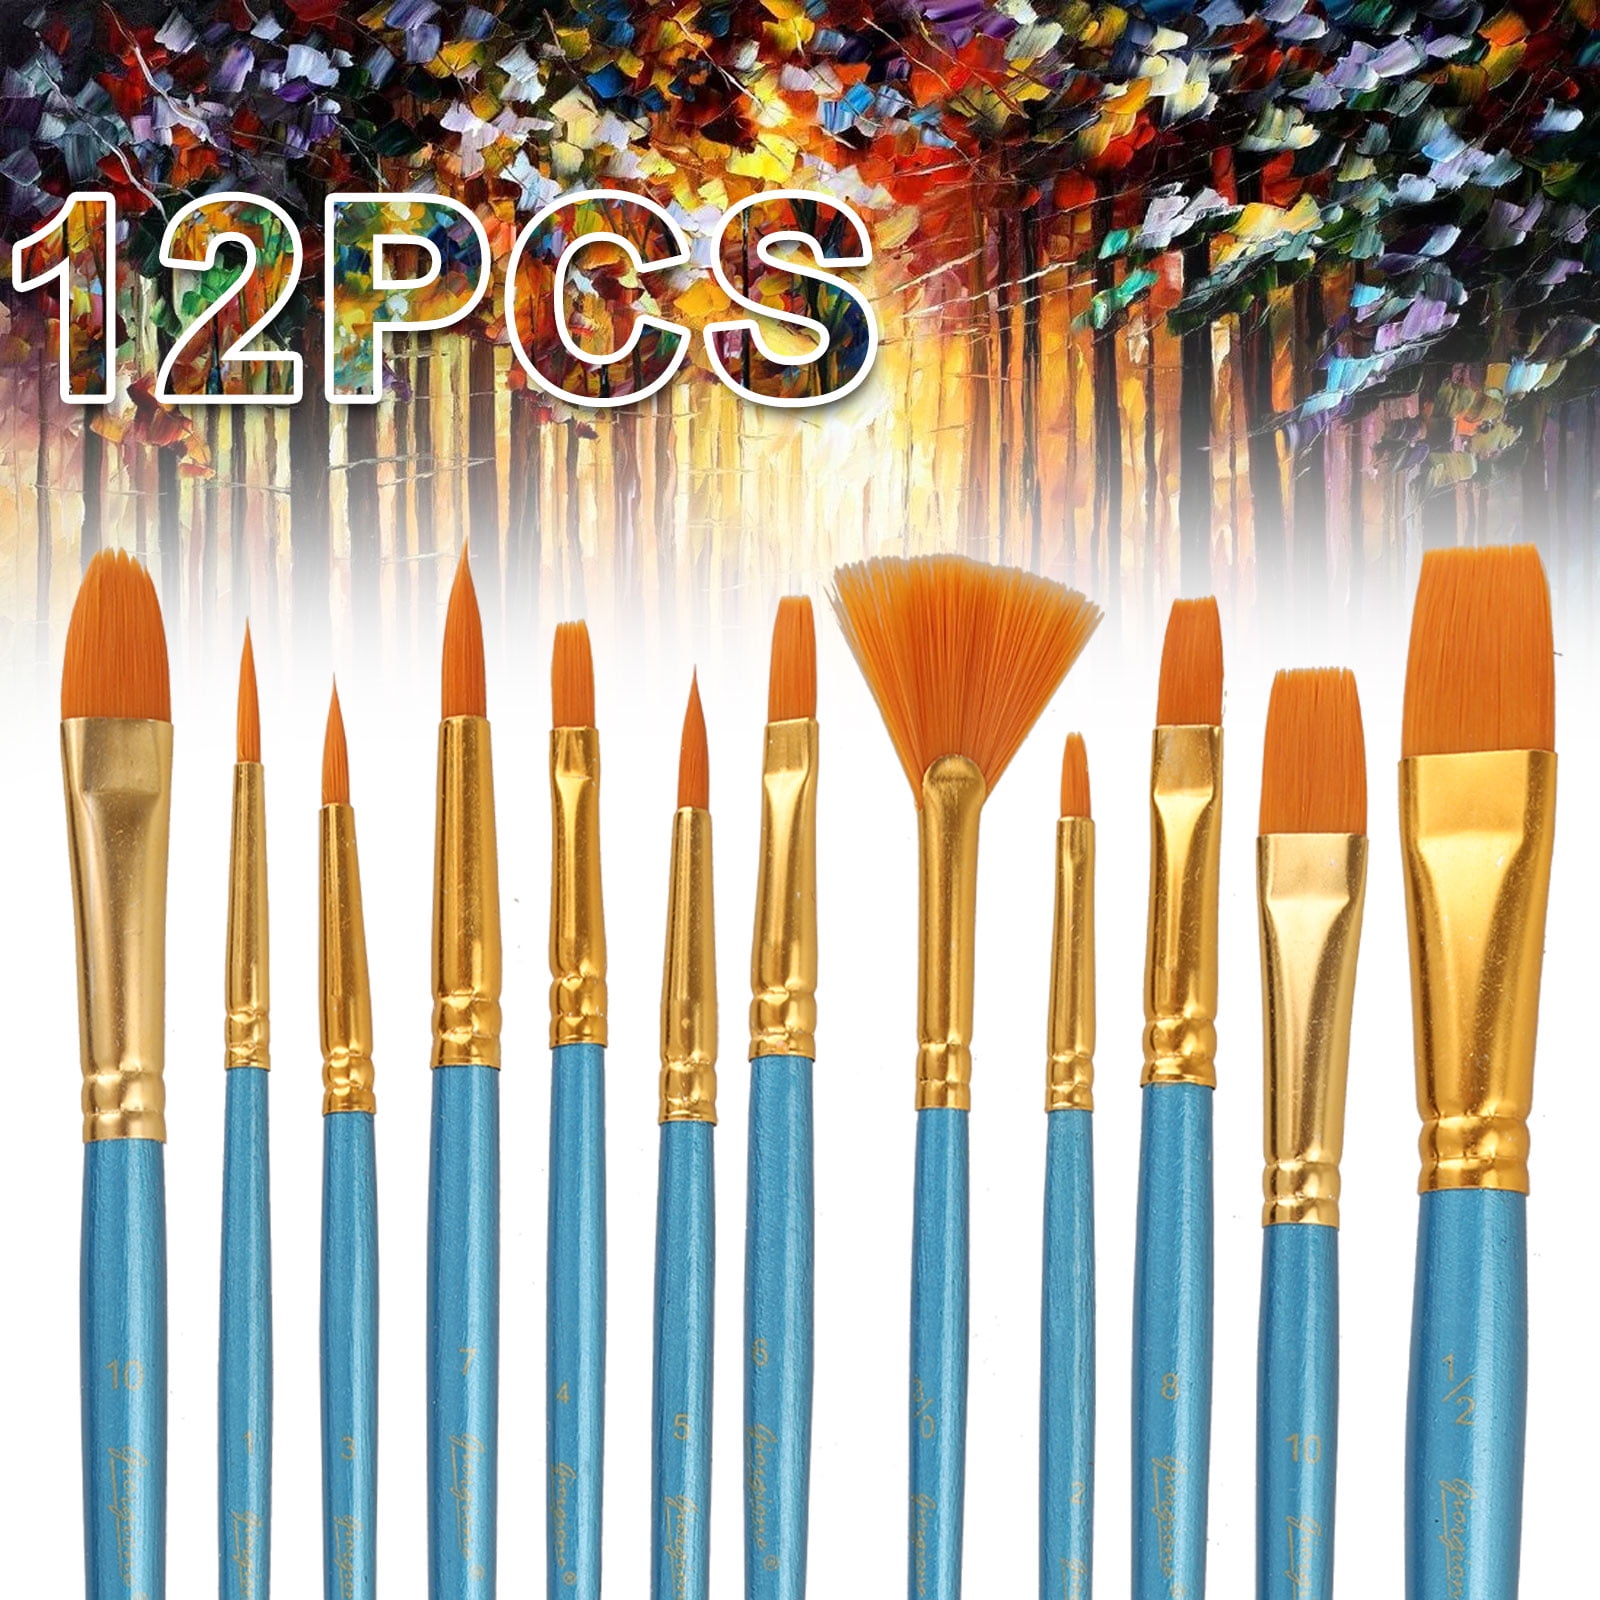 Painting Brush Artists Watercolor Oil Painting Training Brushes Set 10PCS Useful 